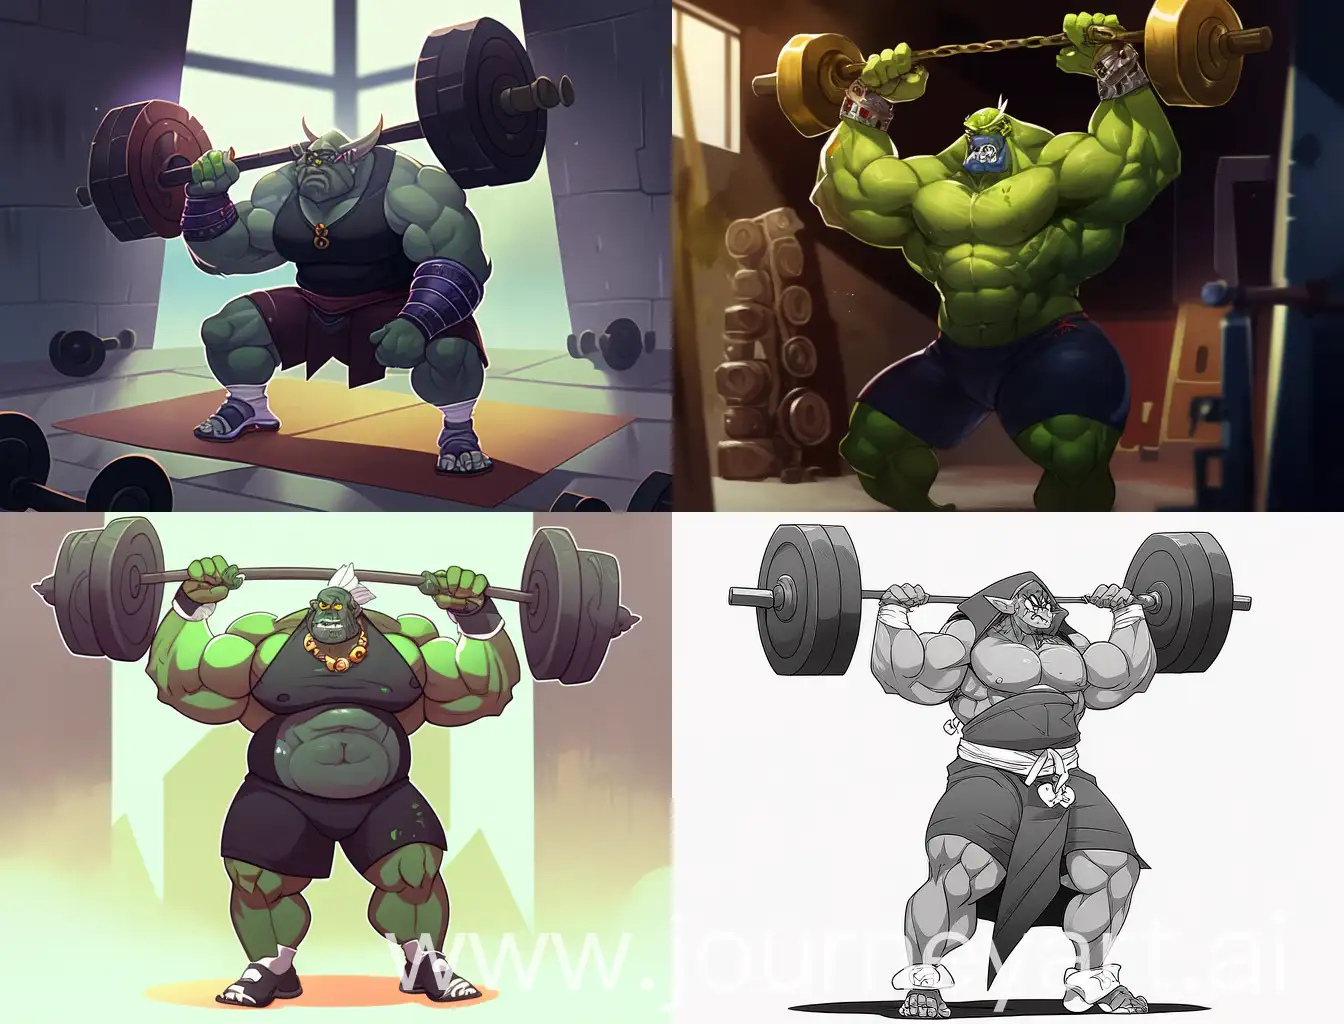 Orc weightlifter in full height